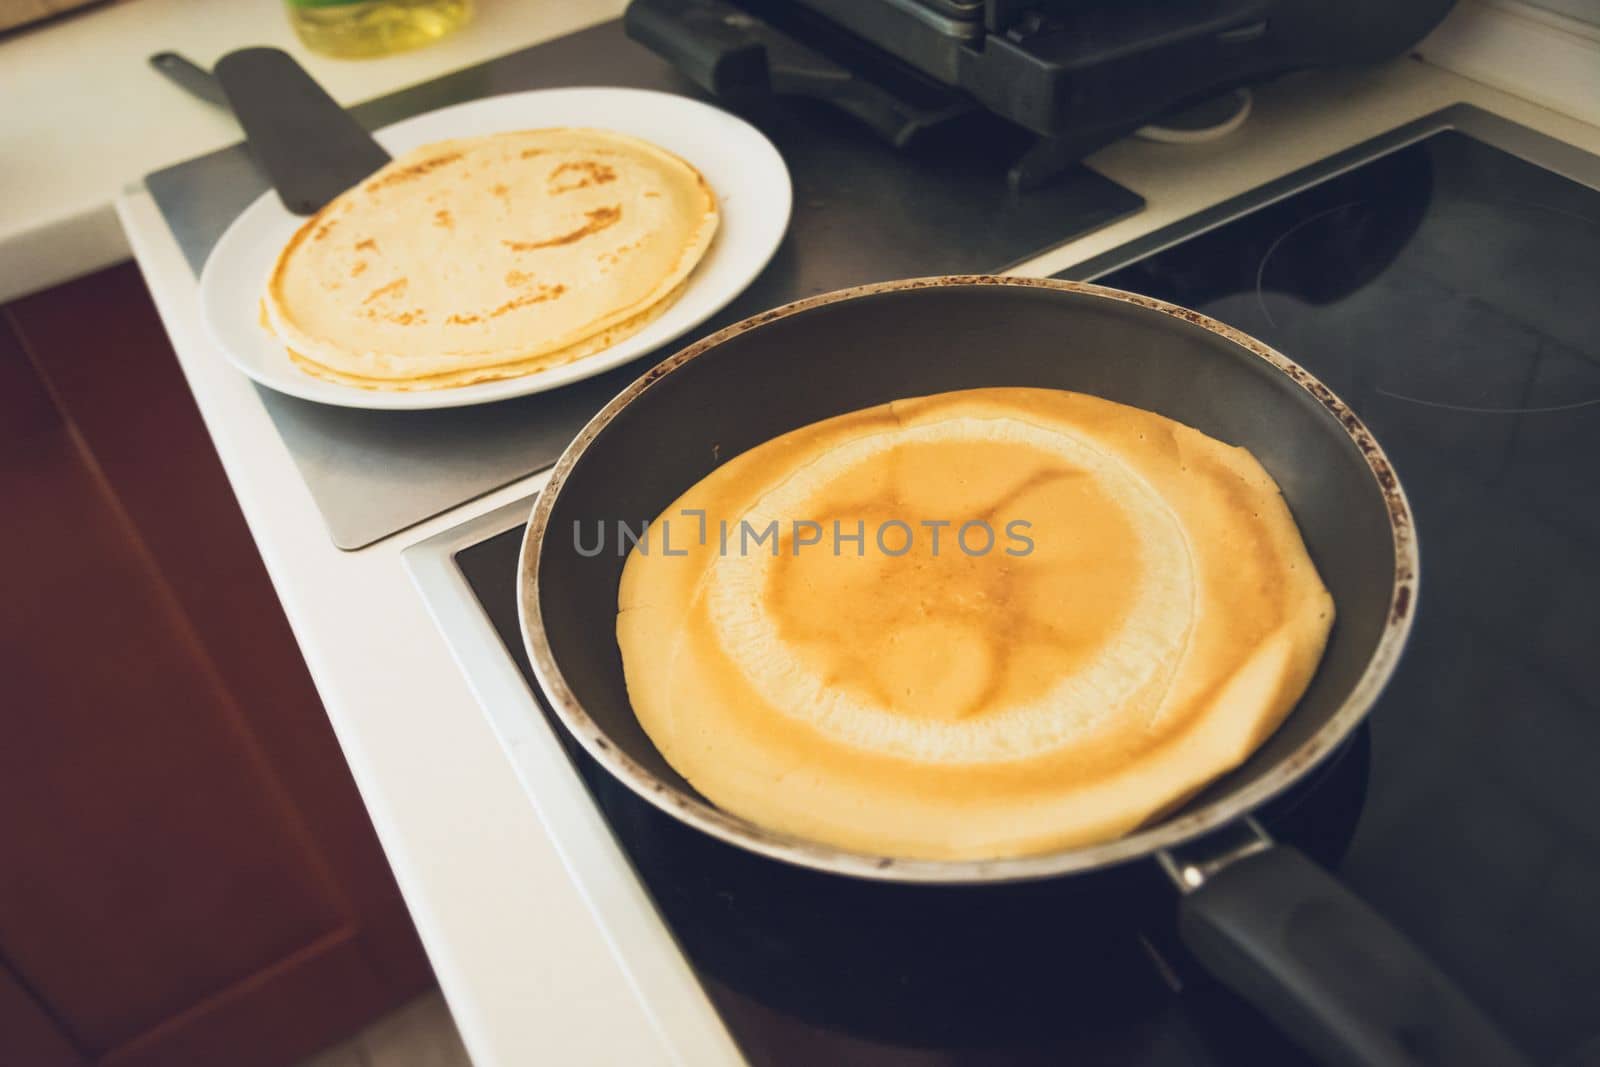 Frying pancakes in a pan on an induction hob by darekb22